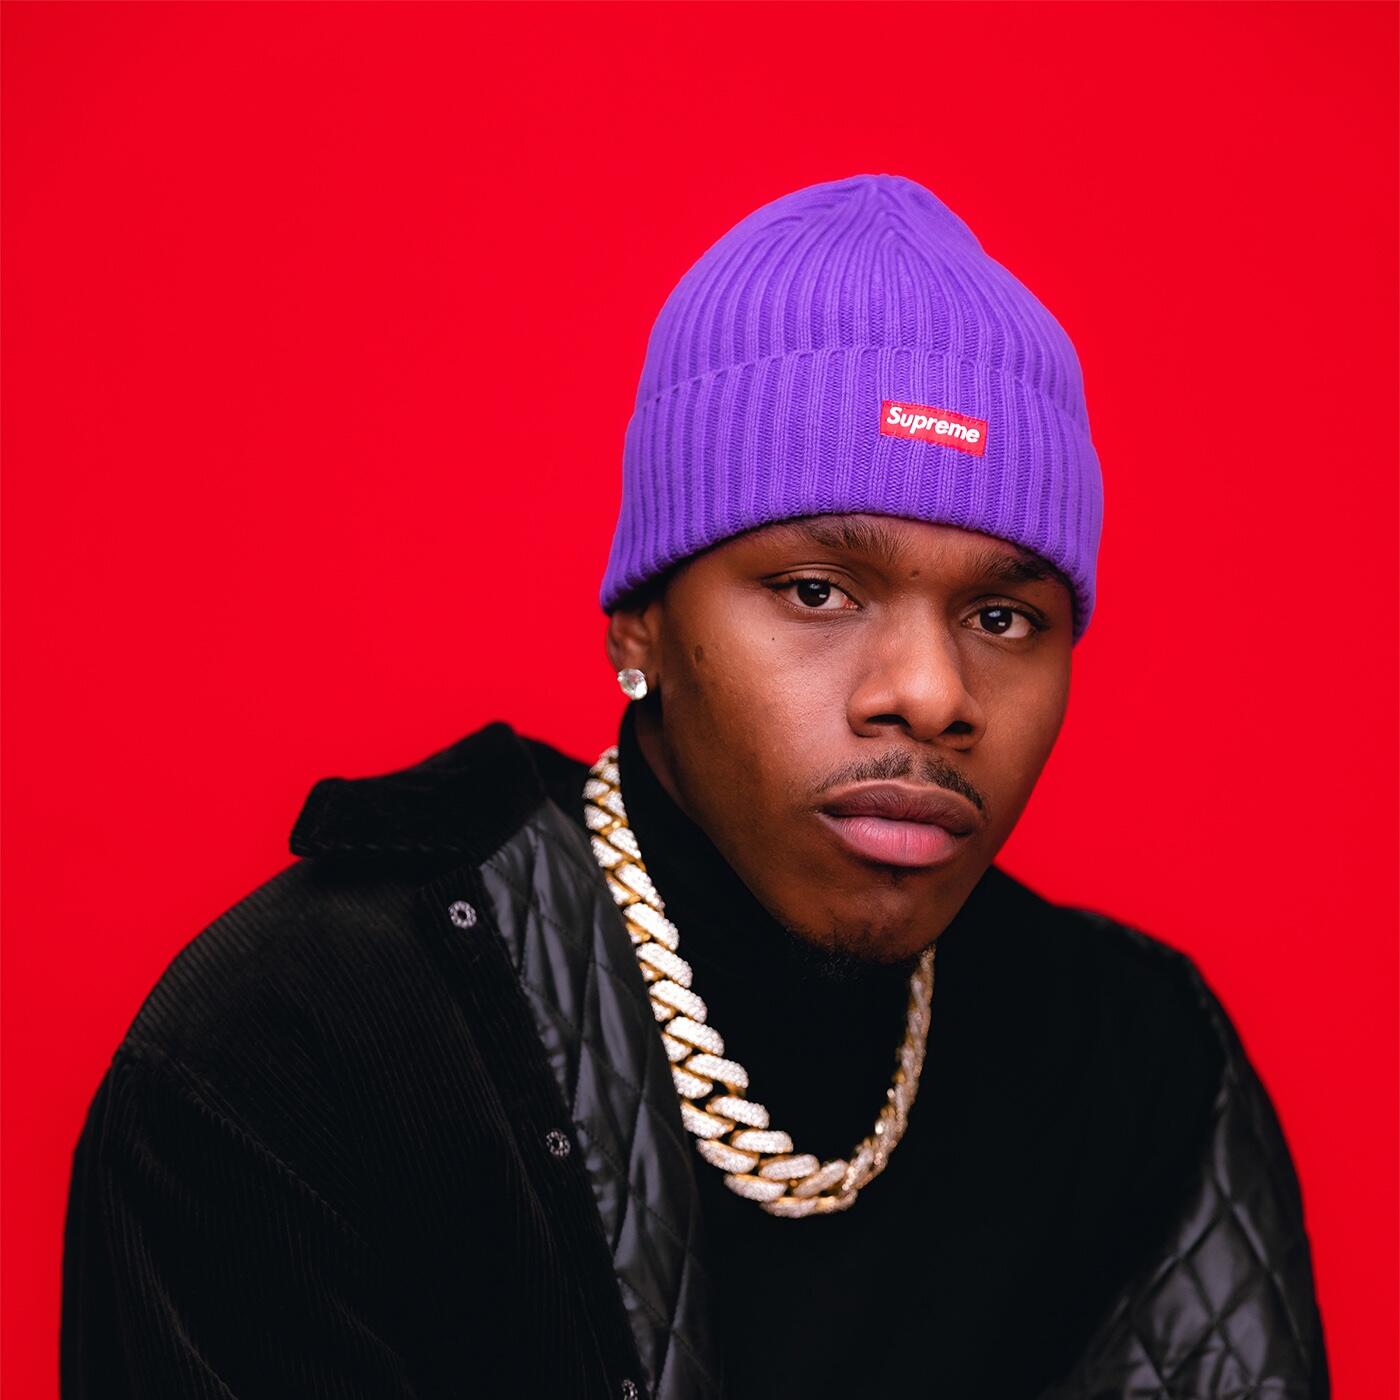 The red-and-white blue striped sweater worn by DaBaby on the cover